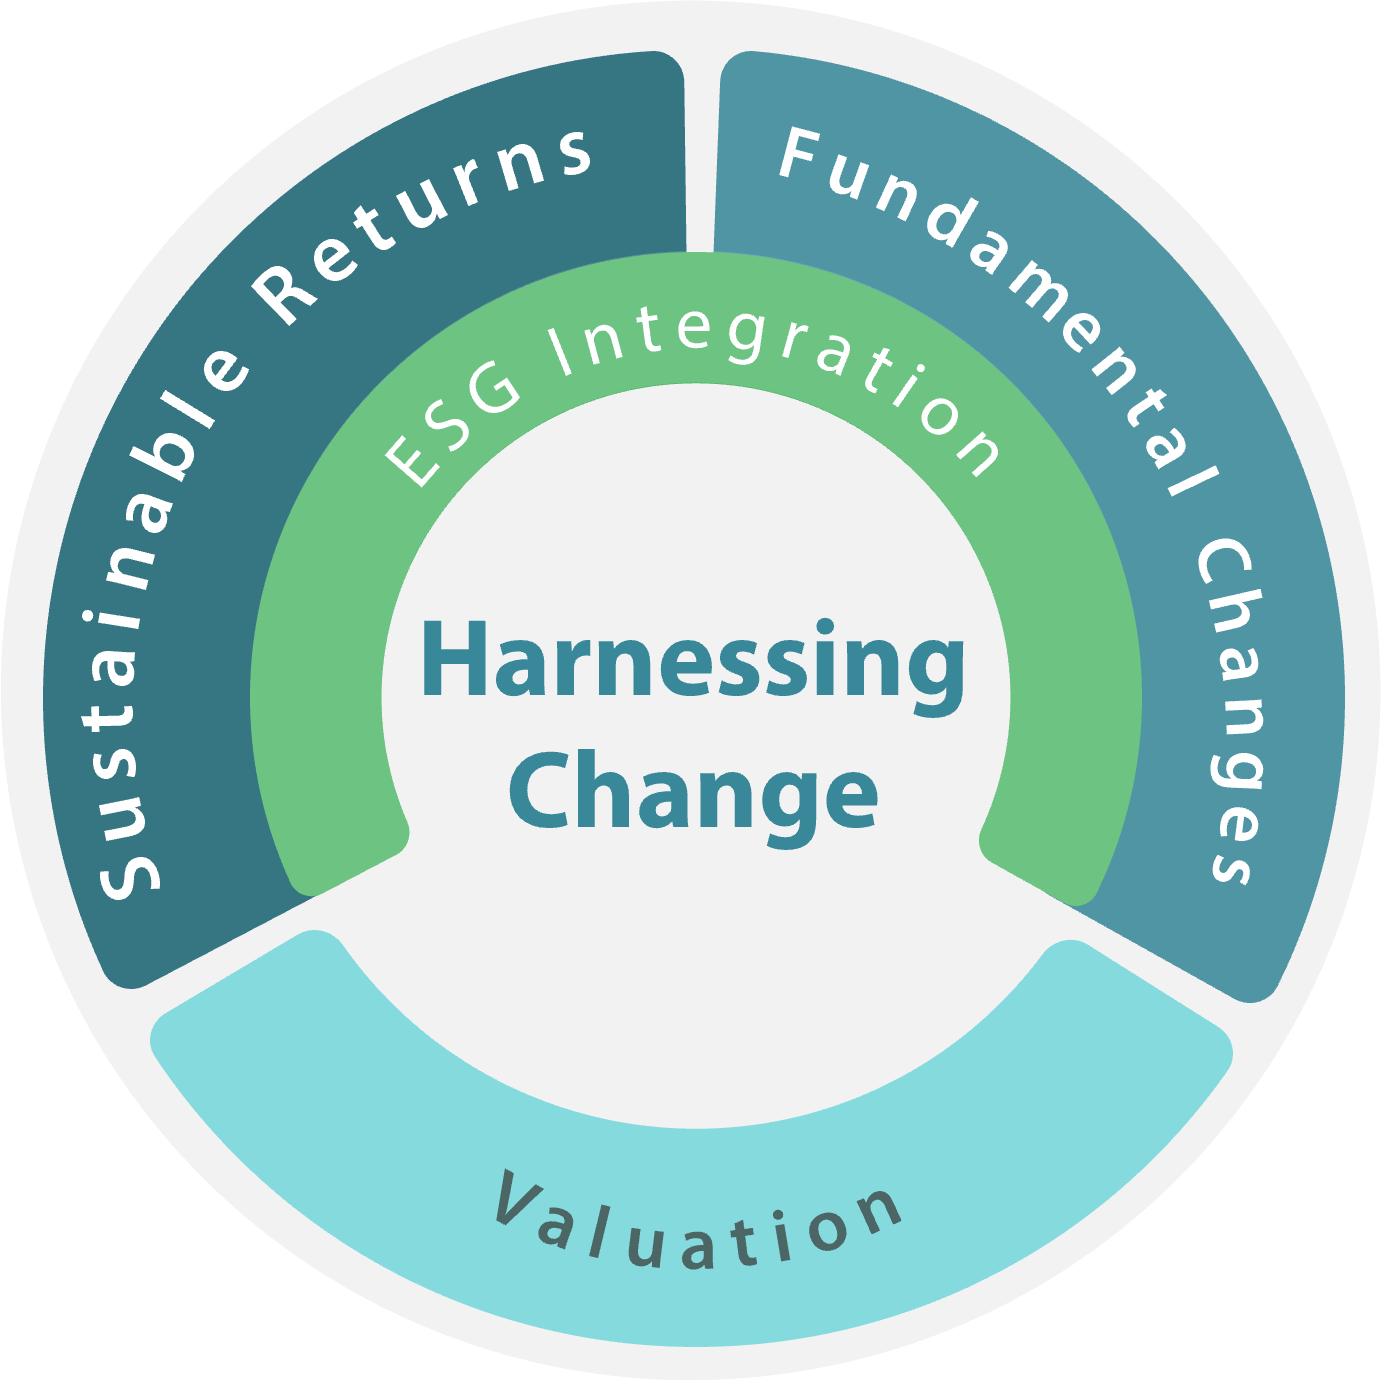 Harvesting Growth, Harnessing Change